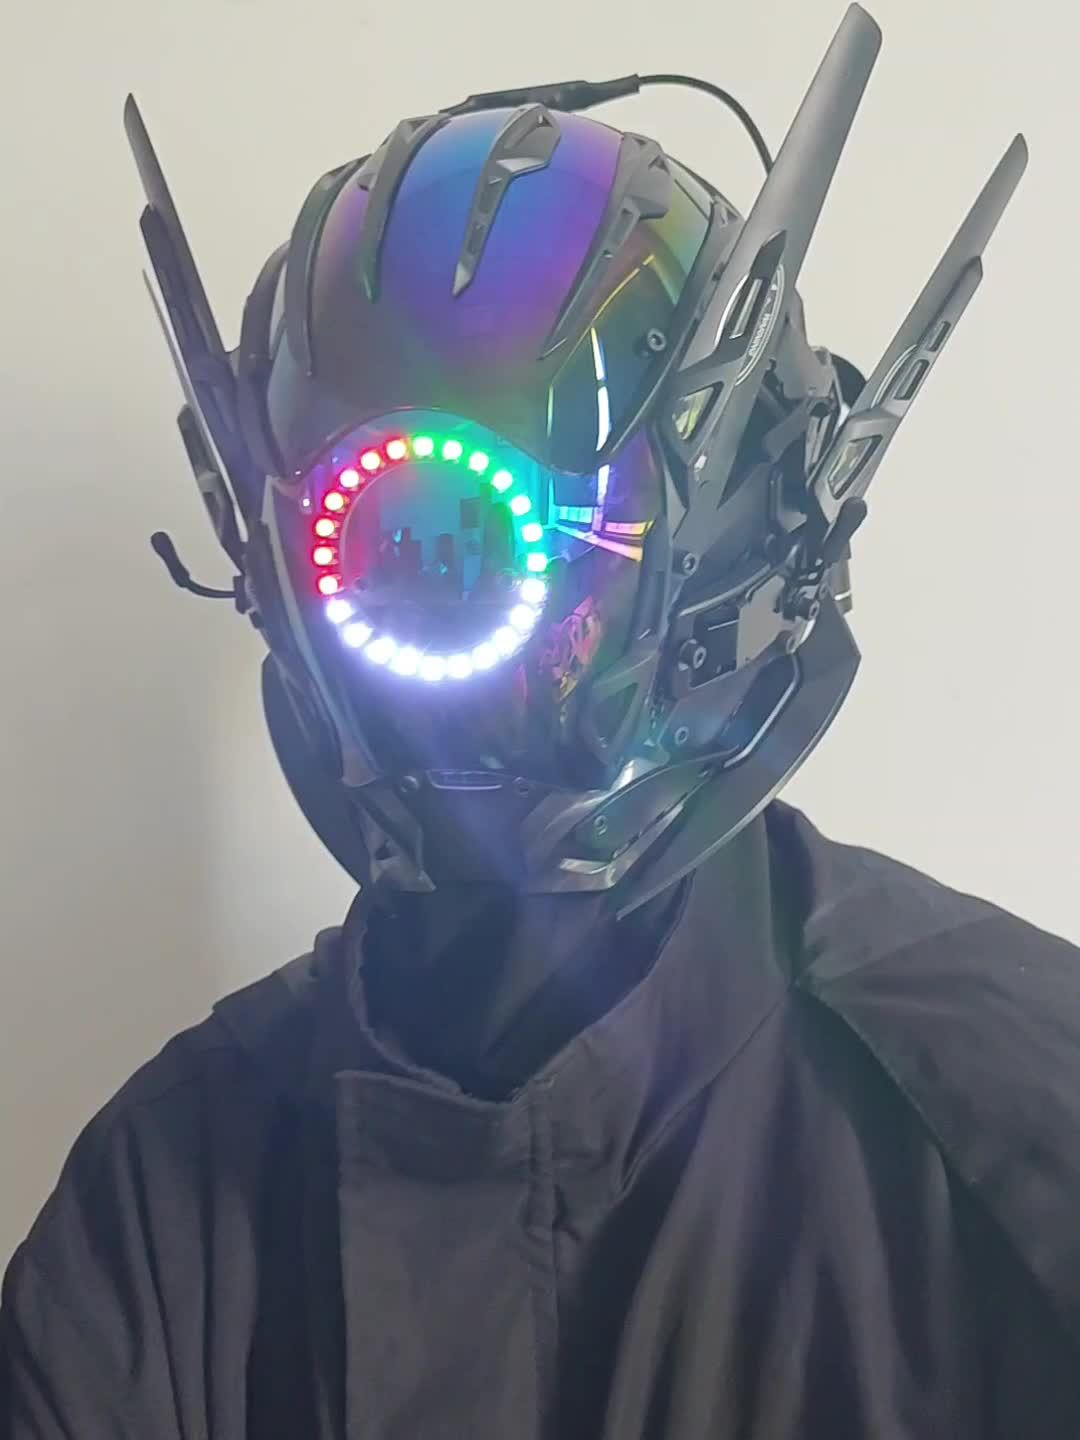 New Cyberpunk Mask With Color Lenses And Multi-mode LED For Halloween Party  Cosplay Gift For Adult